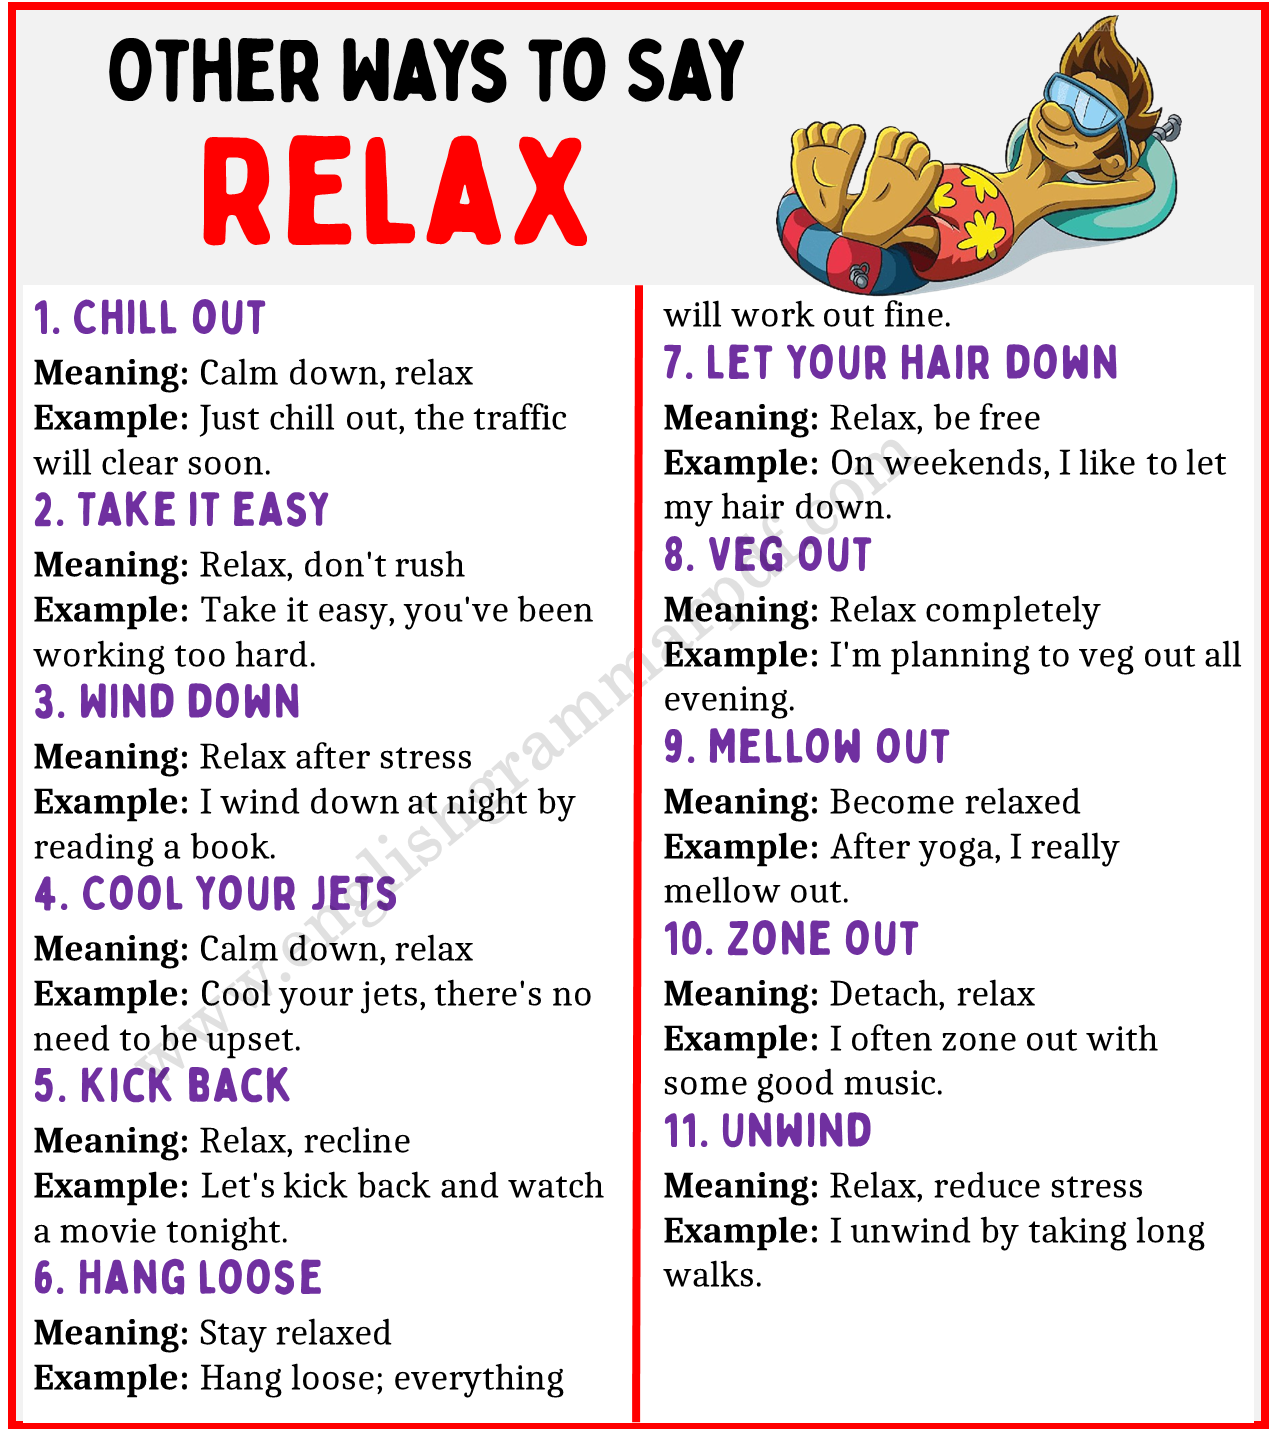 Other Ways to say RELAX